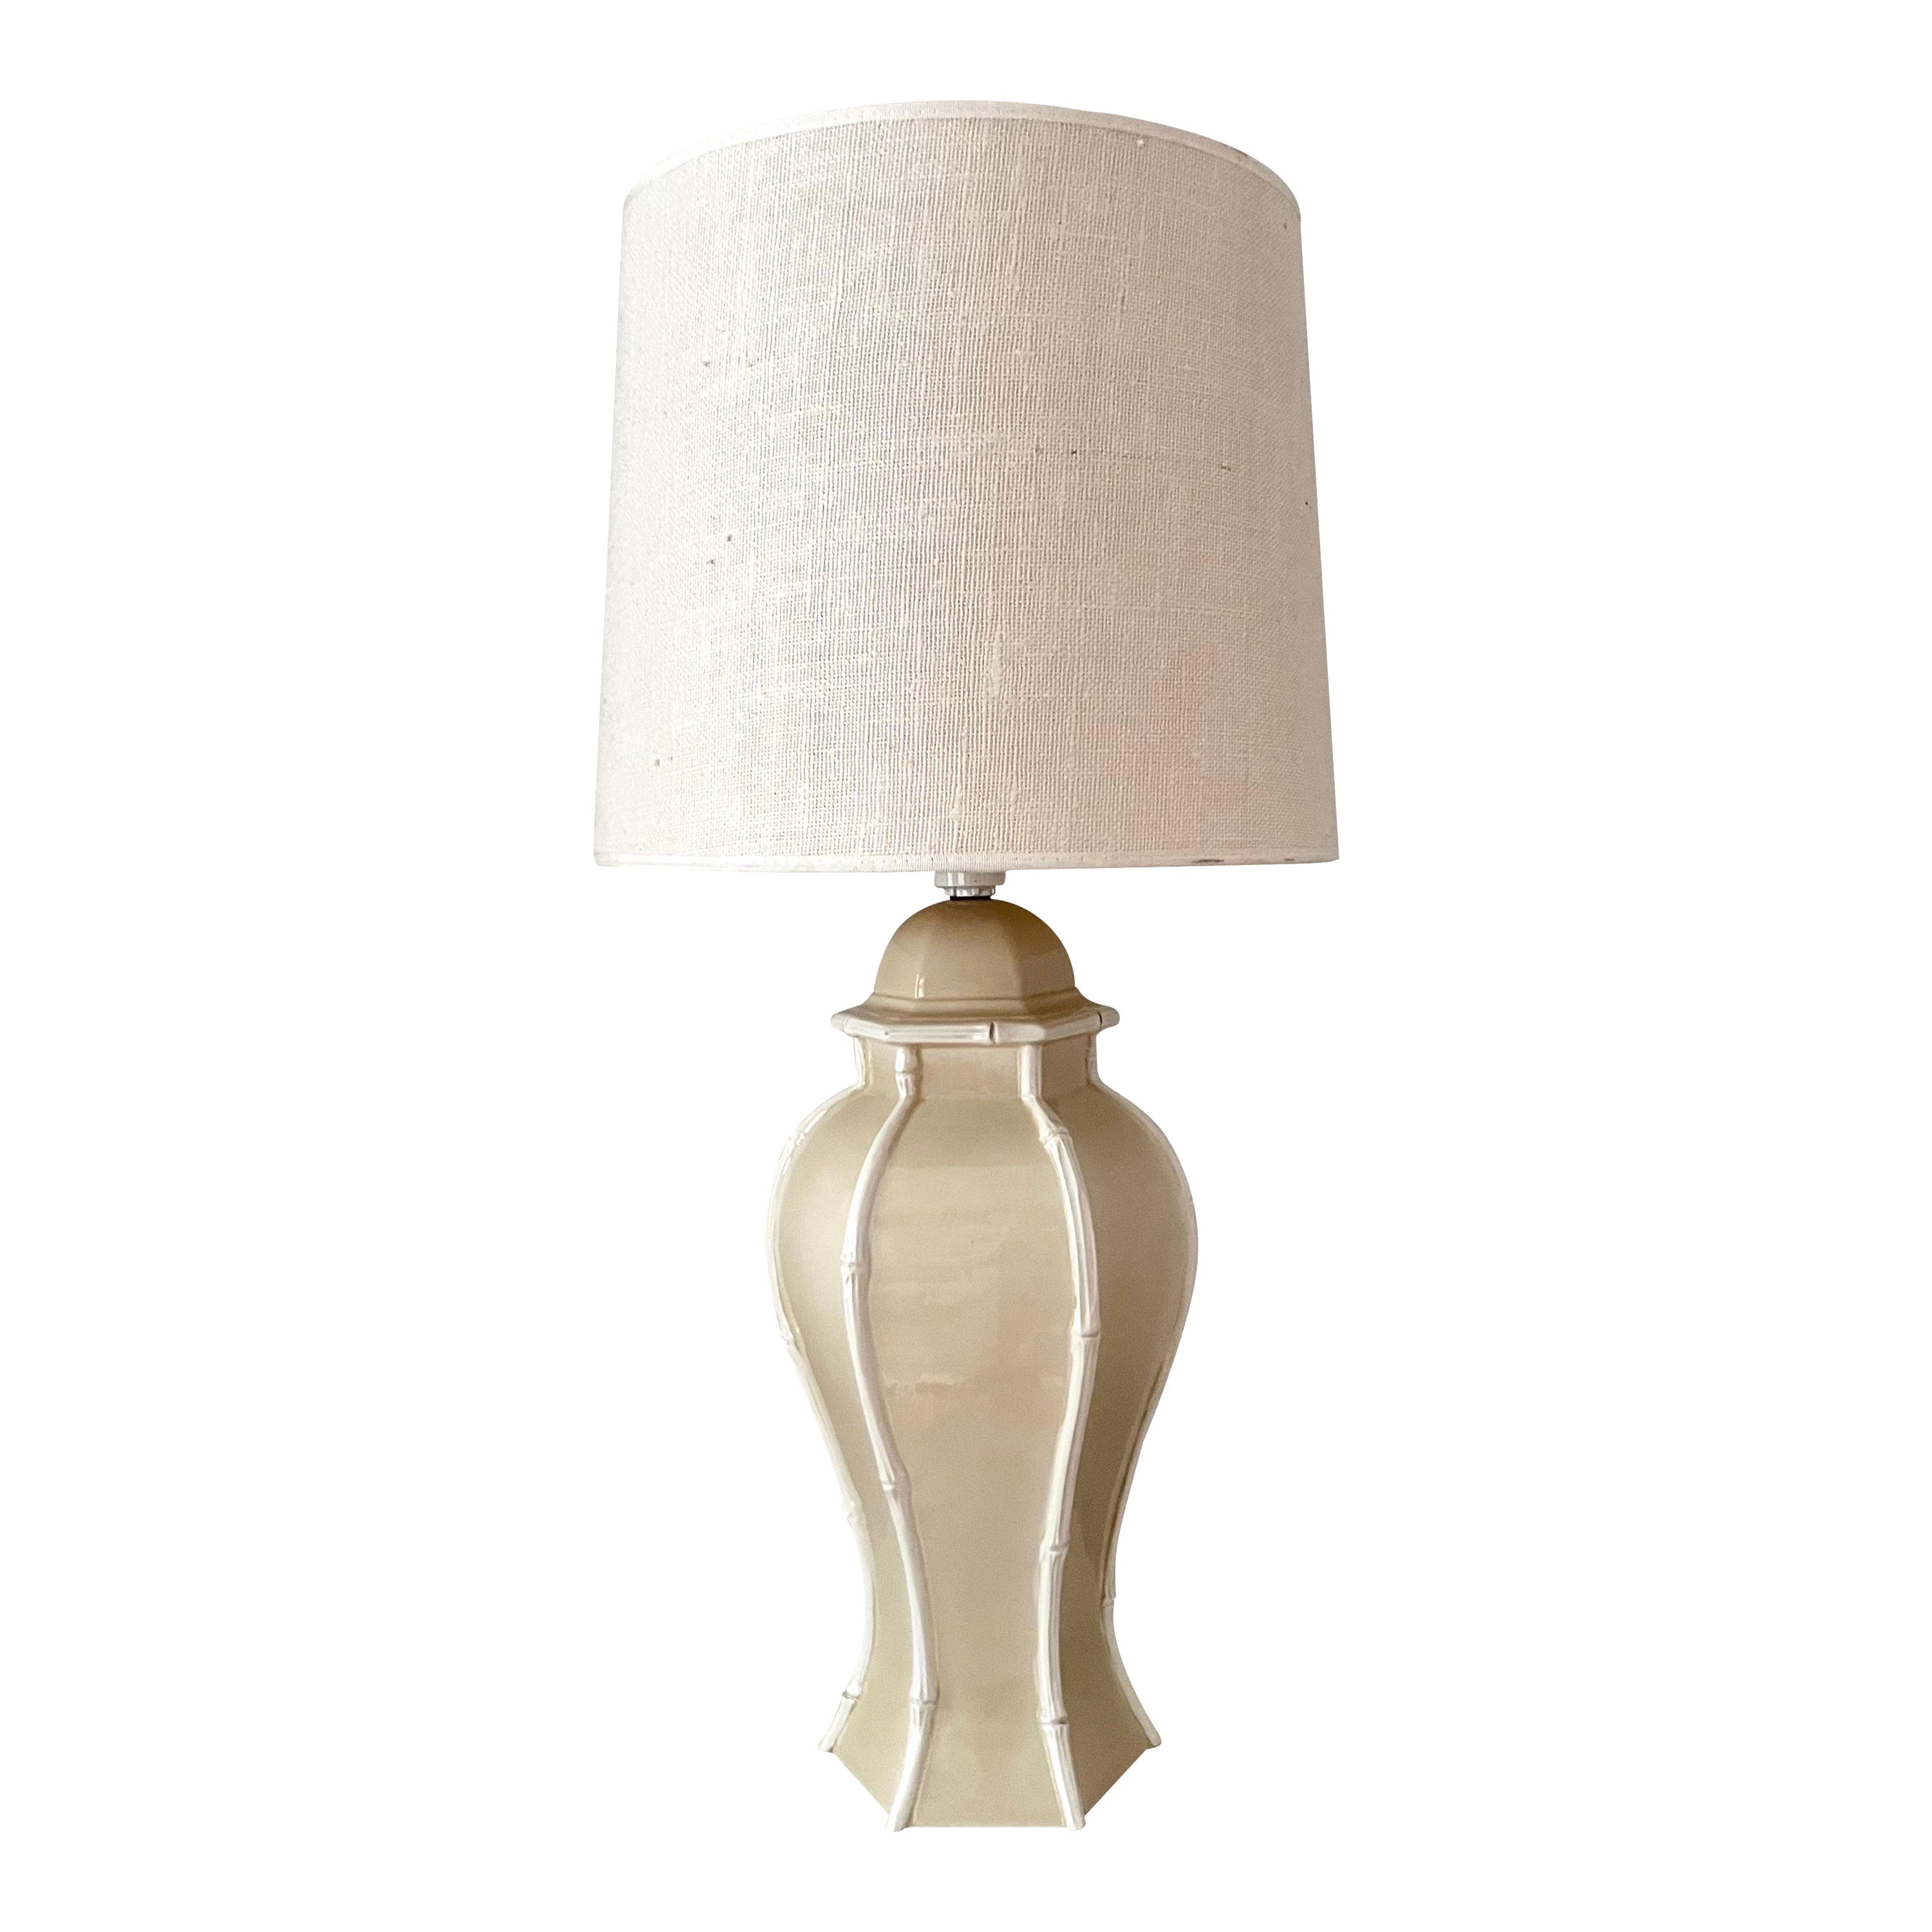 Elegant Tall Ceramic Table Lamp with Bamboo-Inspired Design For Sale